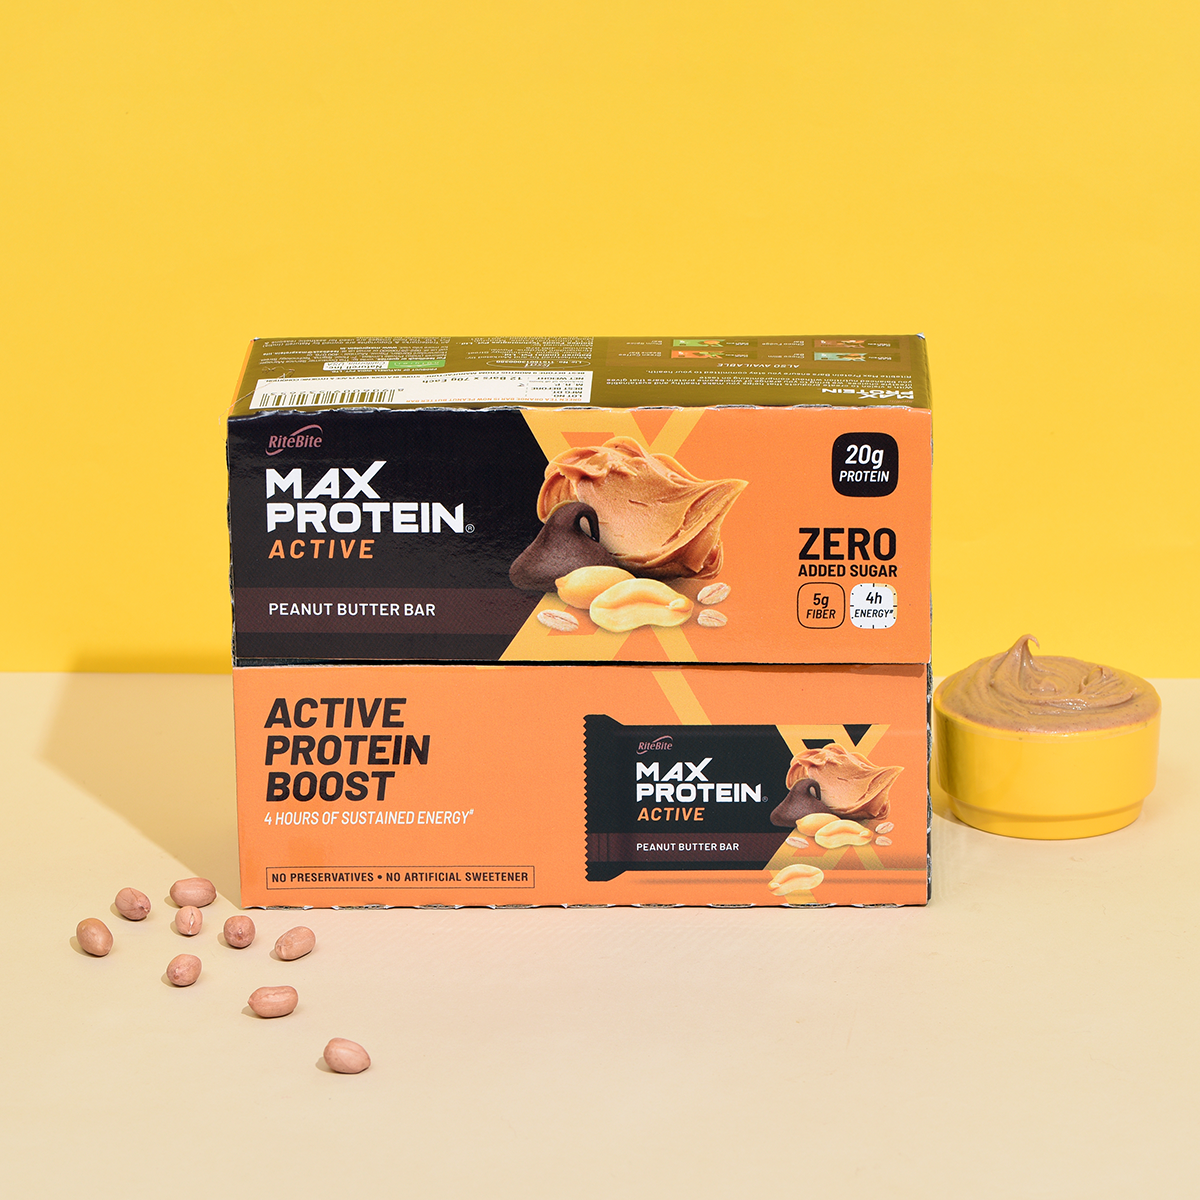 Max Protein Active Peanut Butter